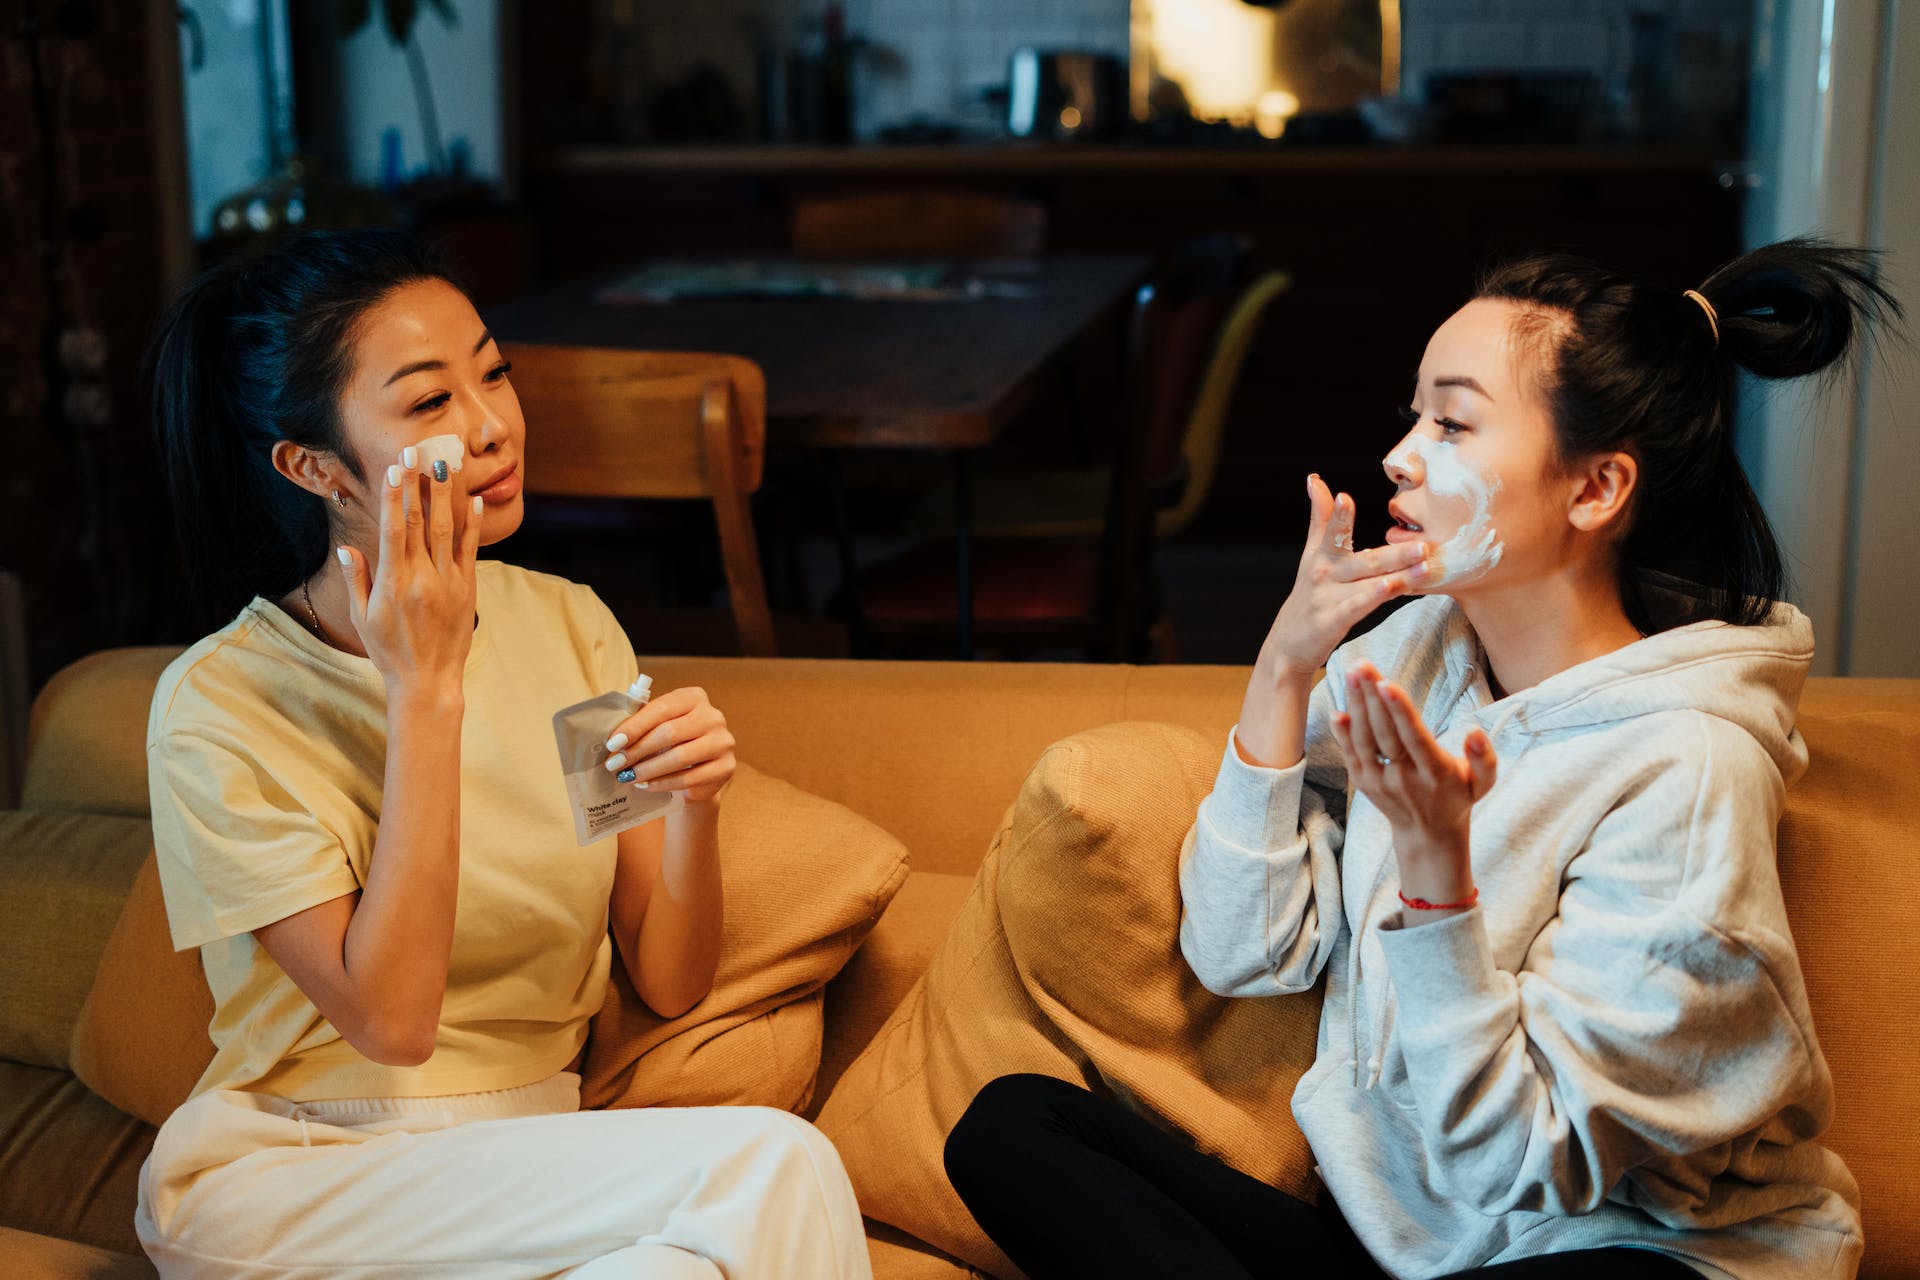 Two women sitting on a couch | Source: Pexels